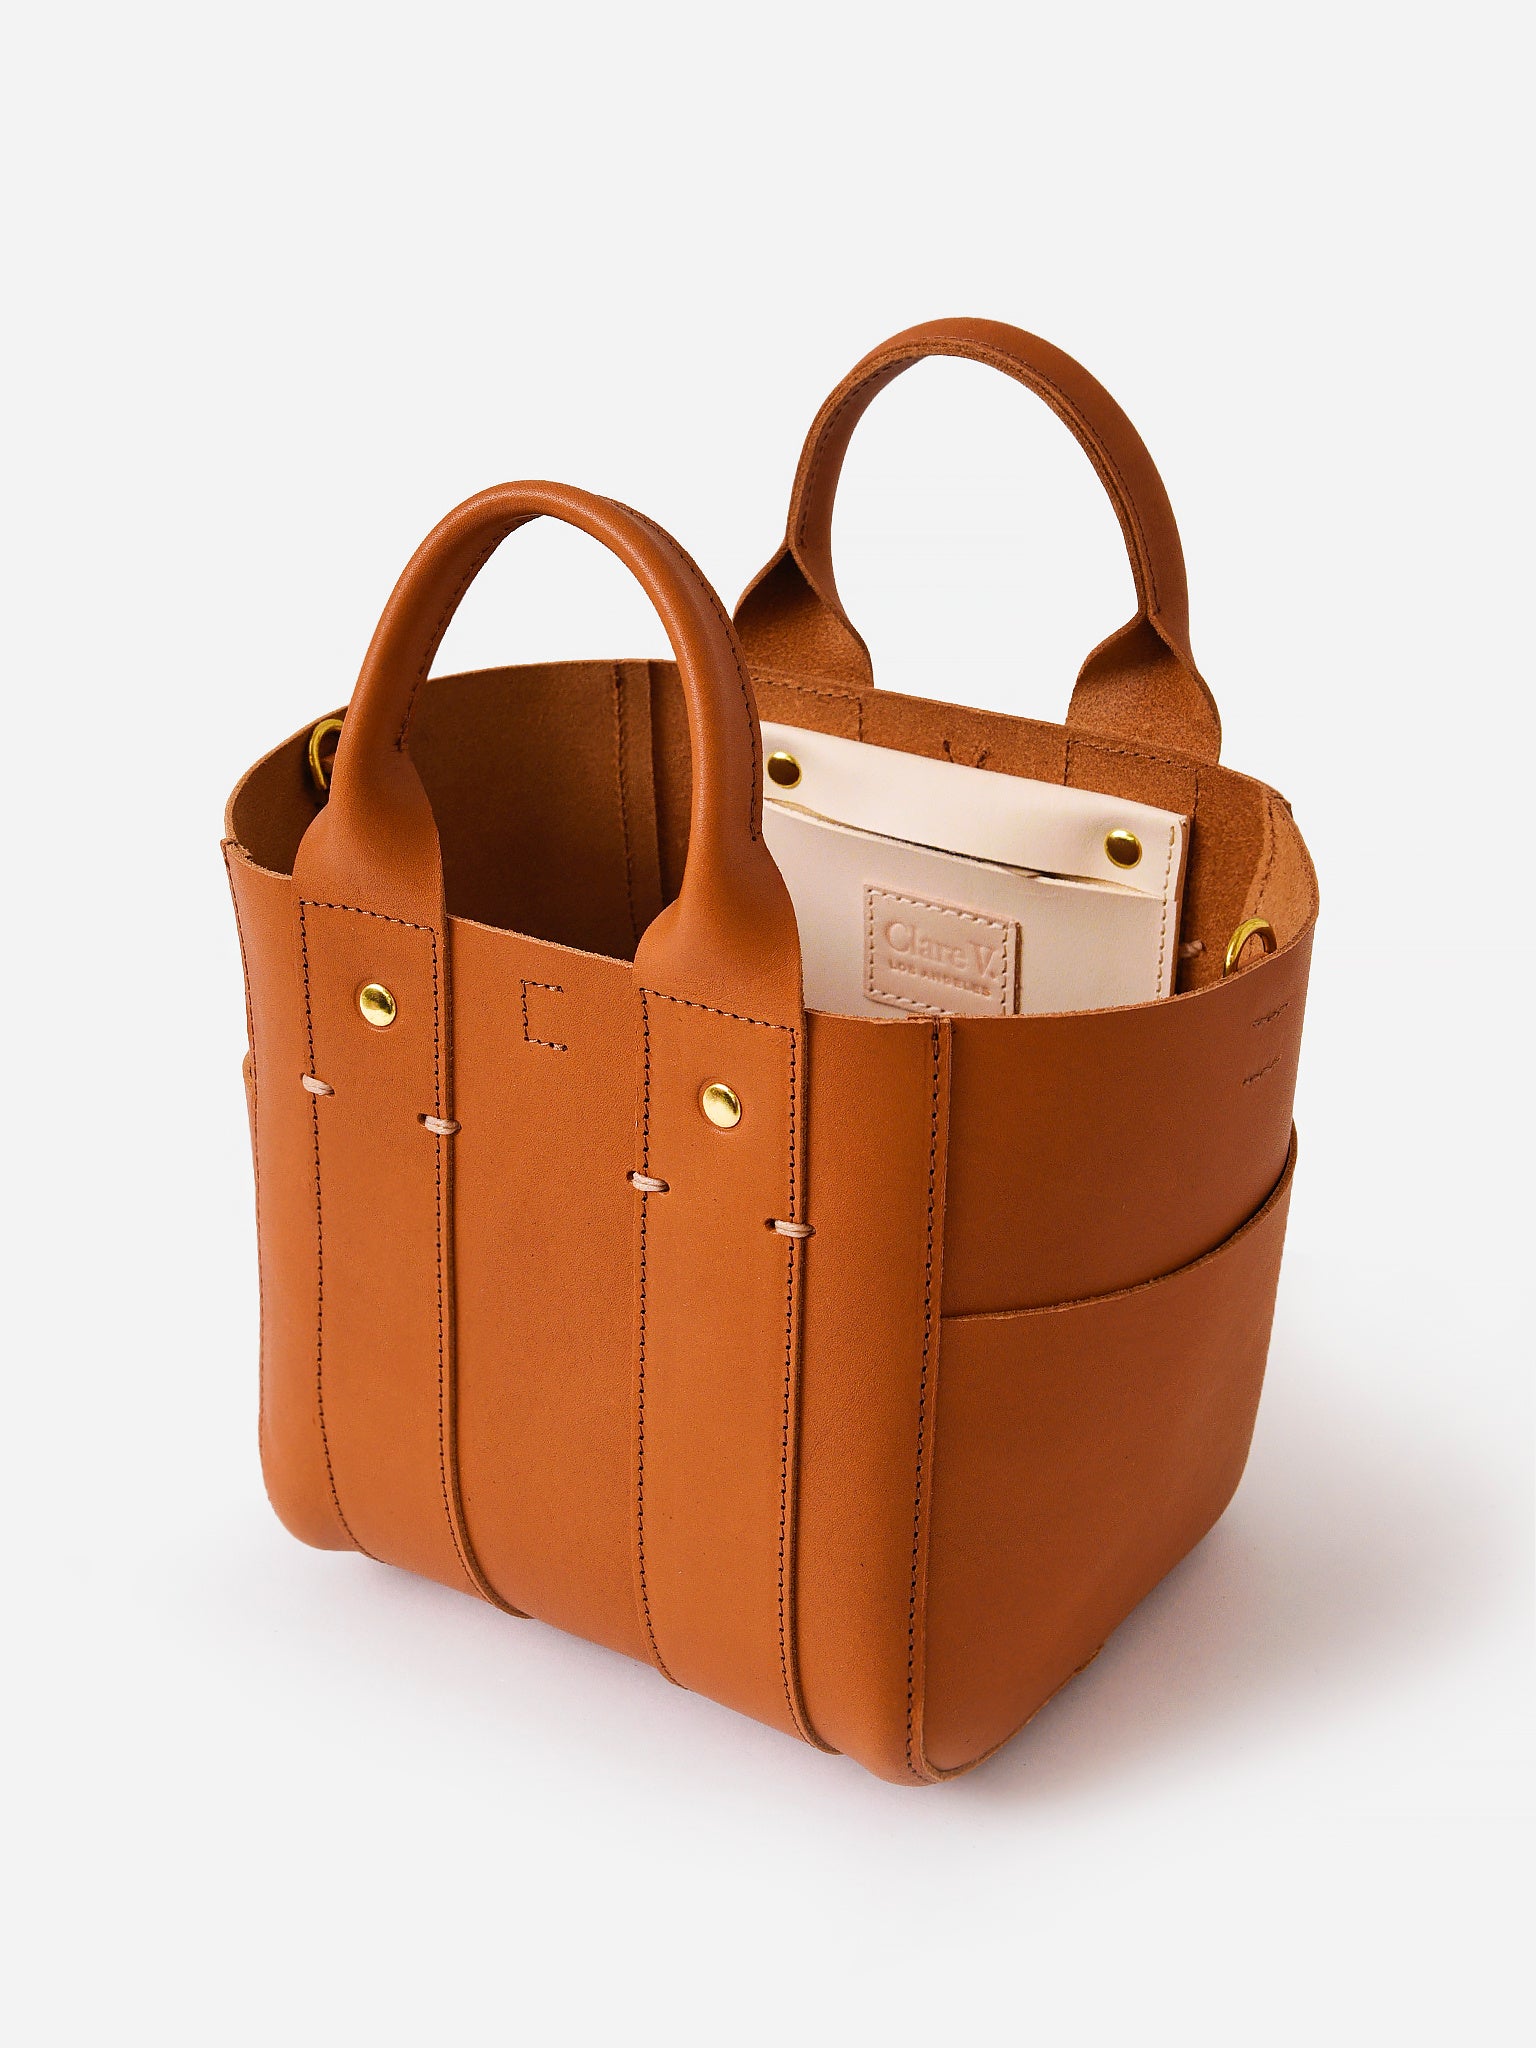 Meet the bag Clare's been waiting for all her life: Le Petit Box Tote